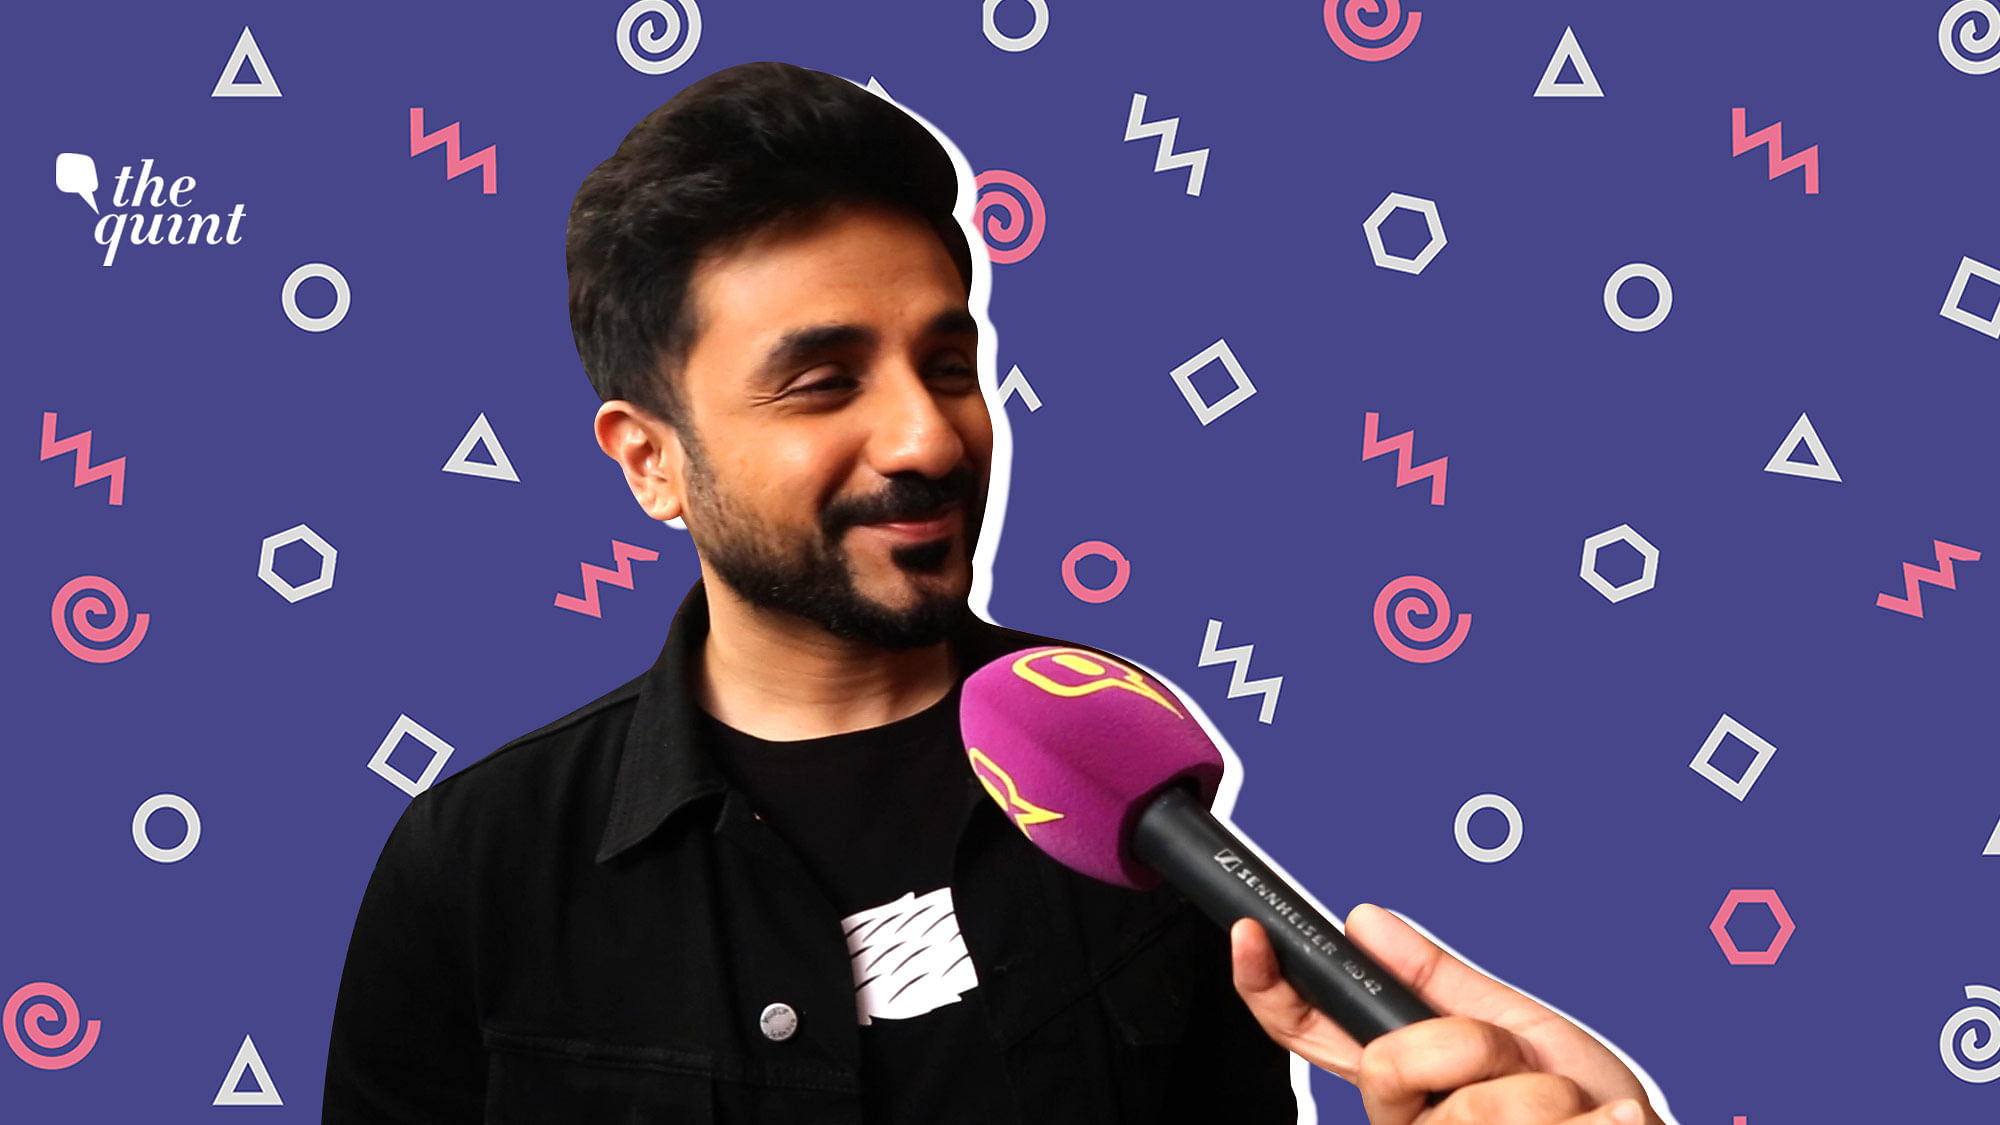 Vir Das will be a part of a new audio show called ‘Be Stupid’.